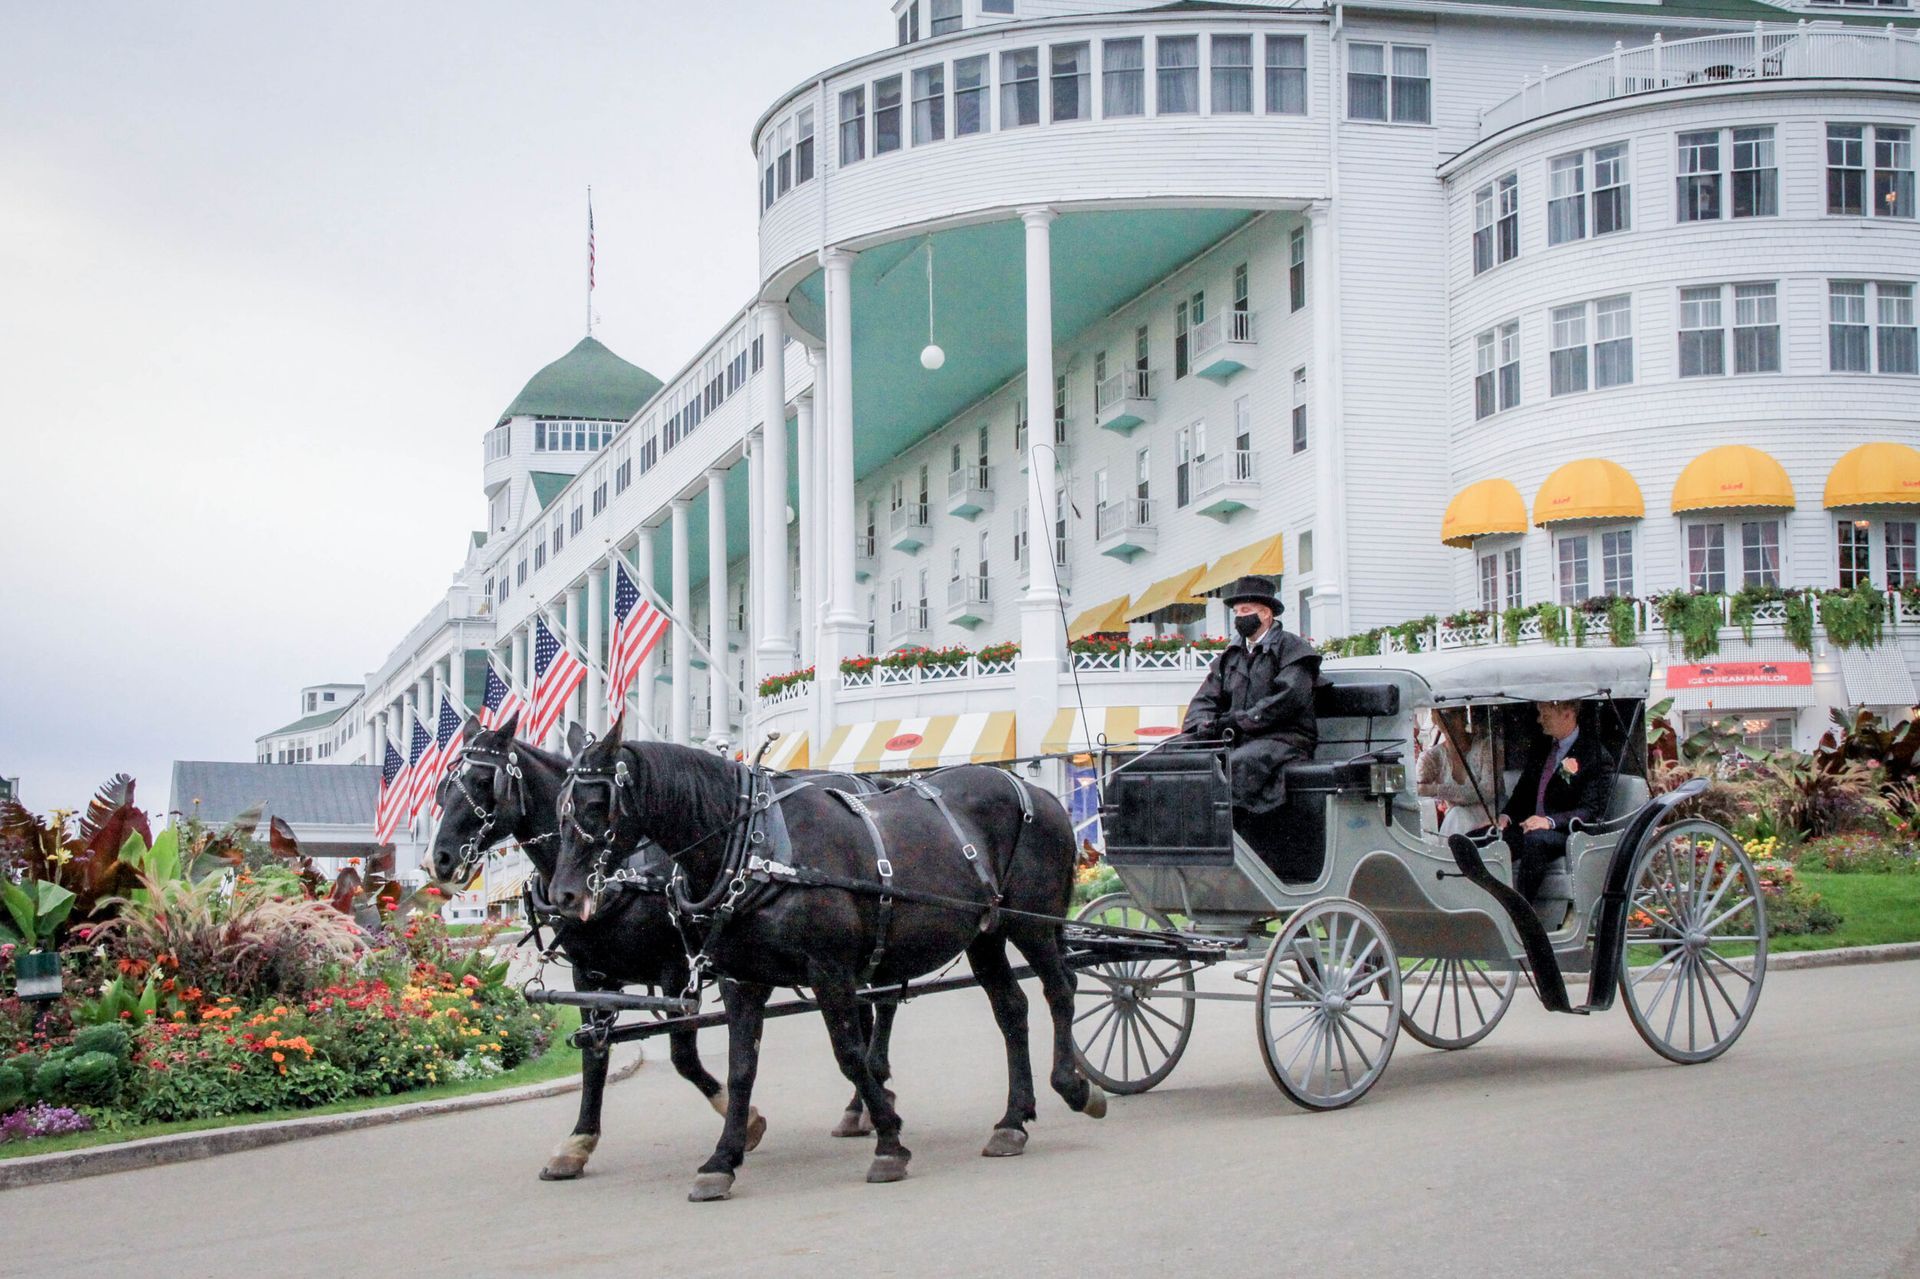 a horse drawn carriage is driving down the street in front of a large building .